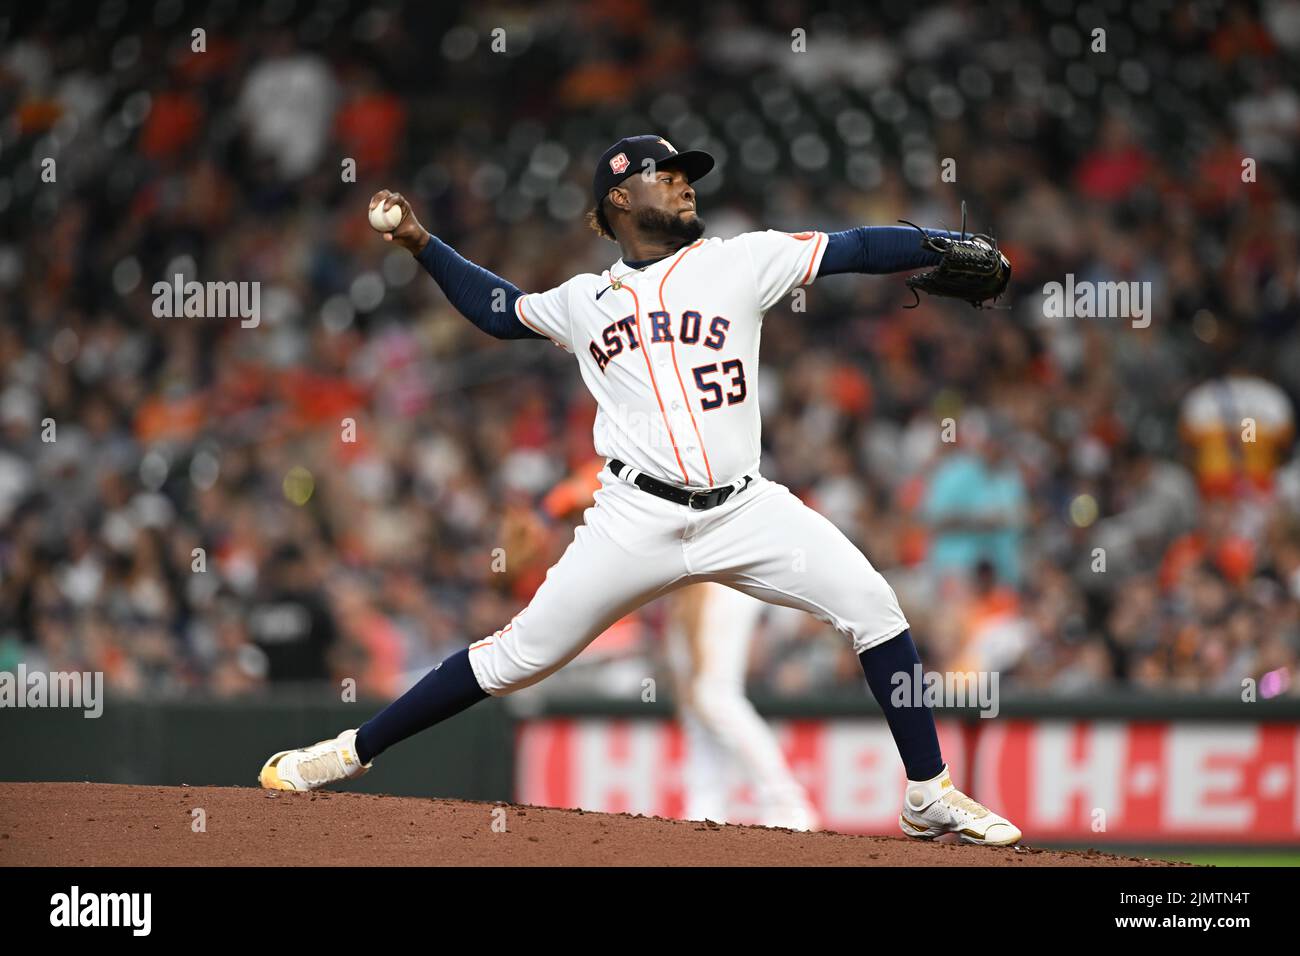 Houston Astros starting pitcher Cristian Javier (53) pitches in the fourth inning of the MLB game between the Boston Red Sox and the Houston Astros on Stock Photo